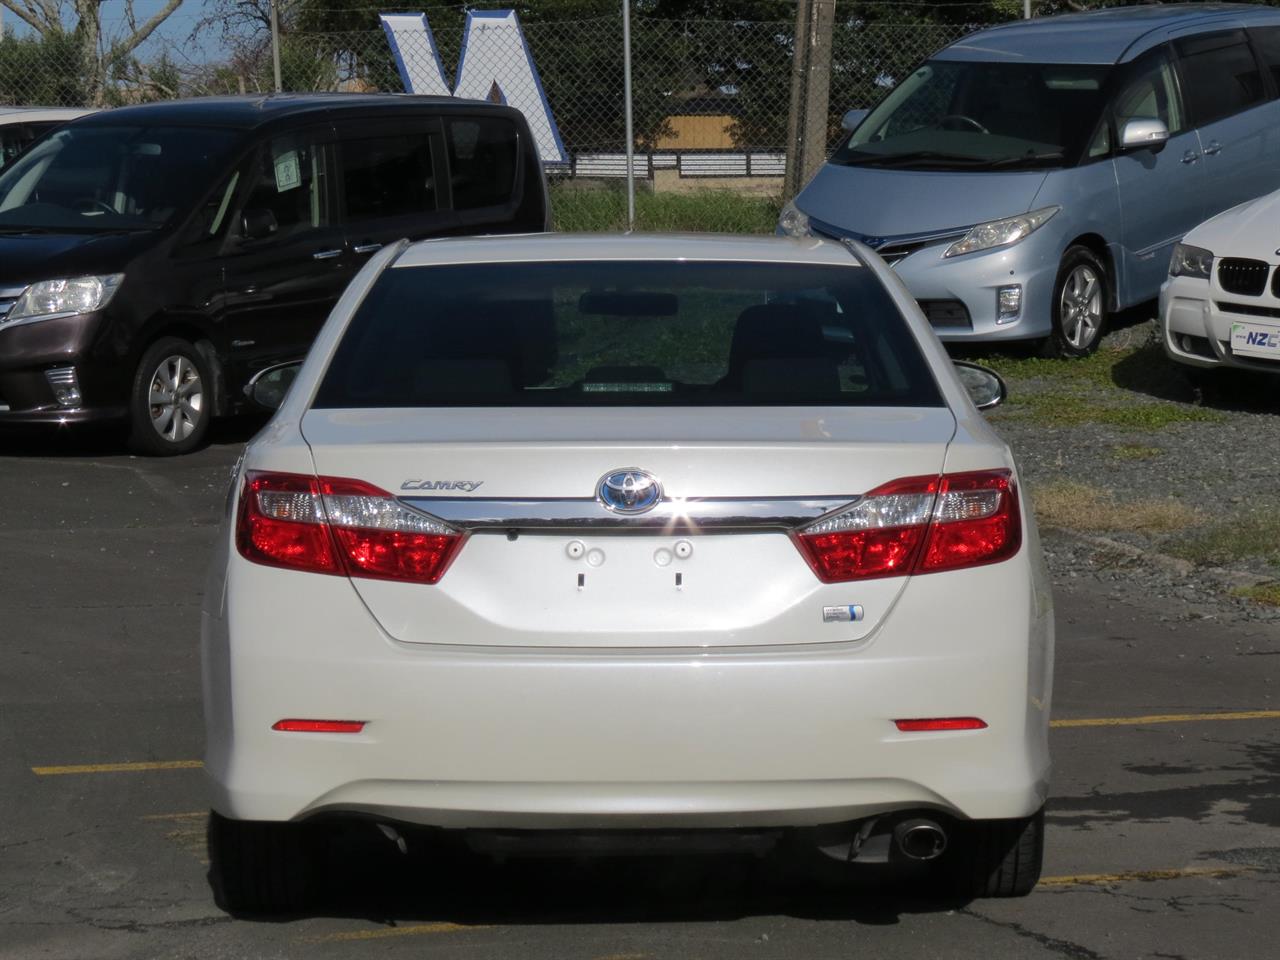 2013 Toyota Camry only $67 weekly